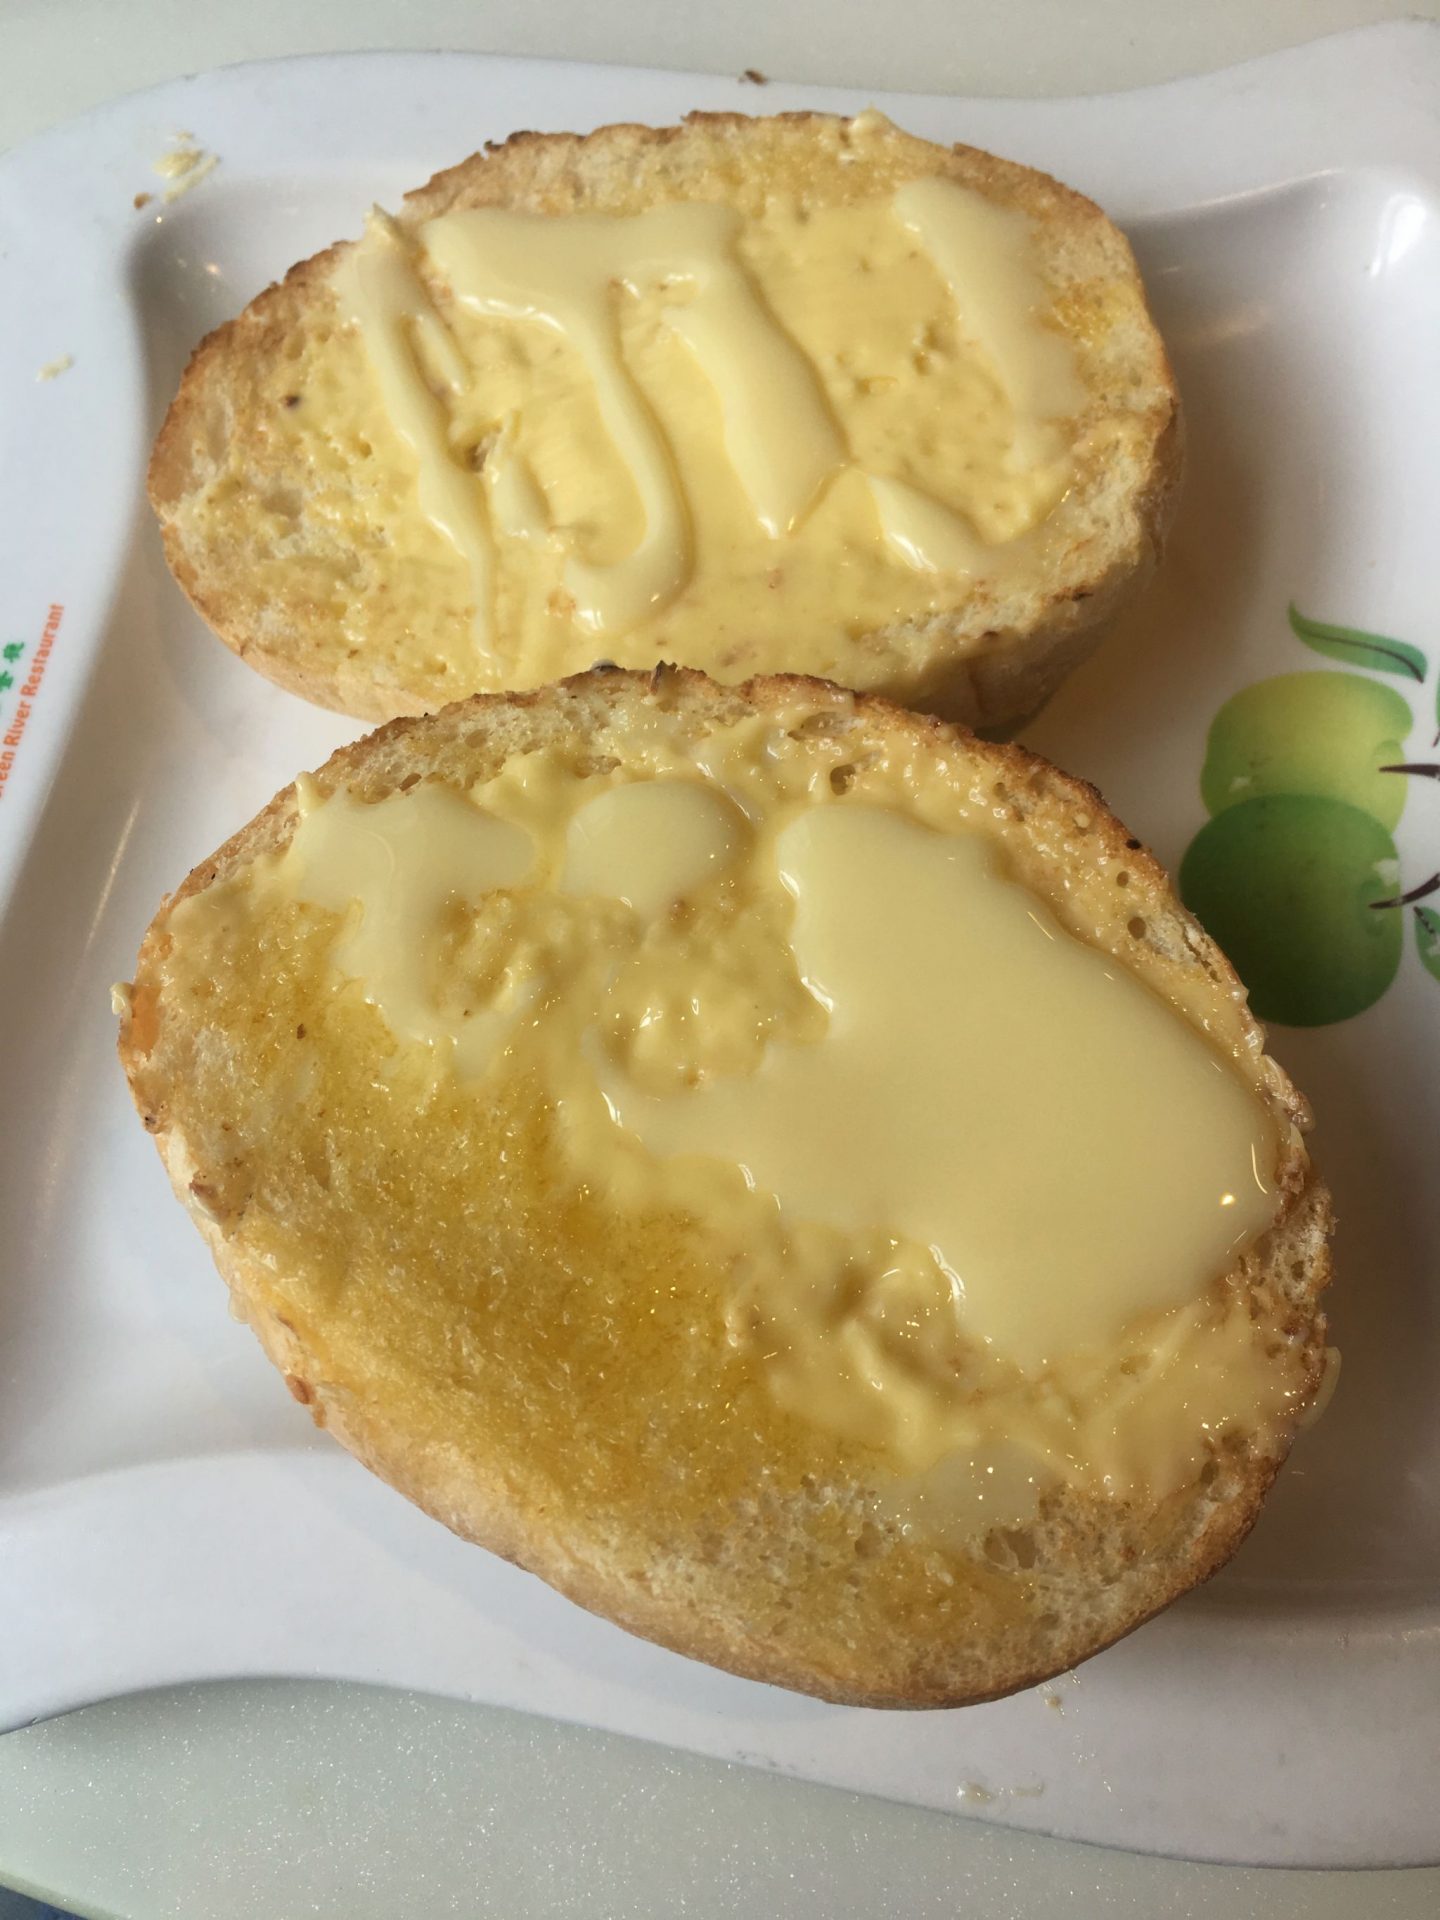 Hong Kong food, toast with condensed milk